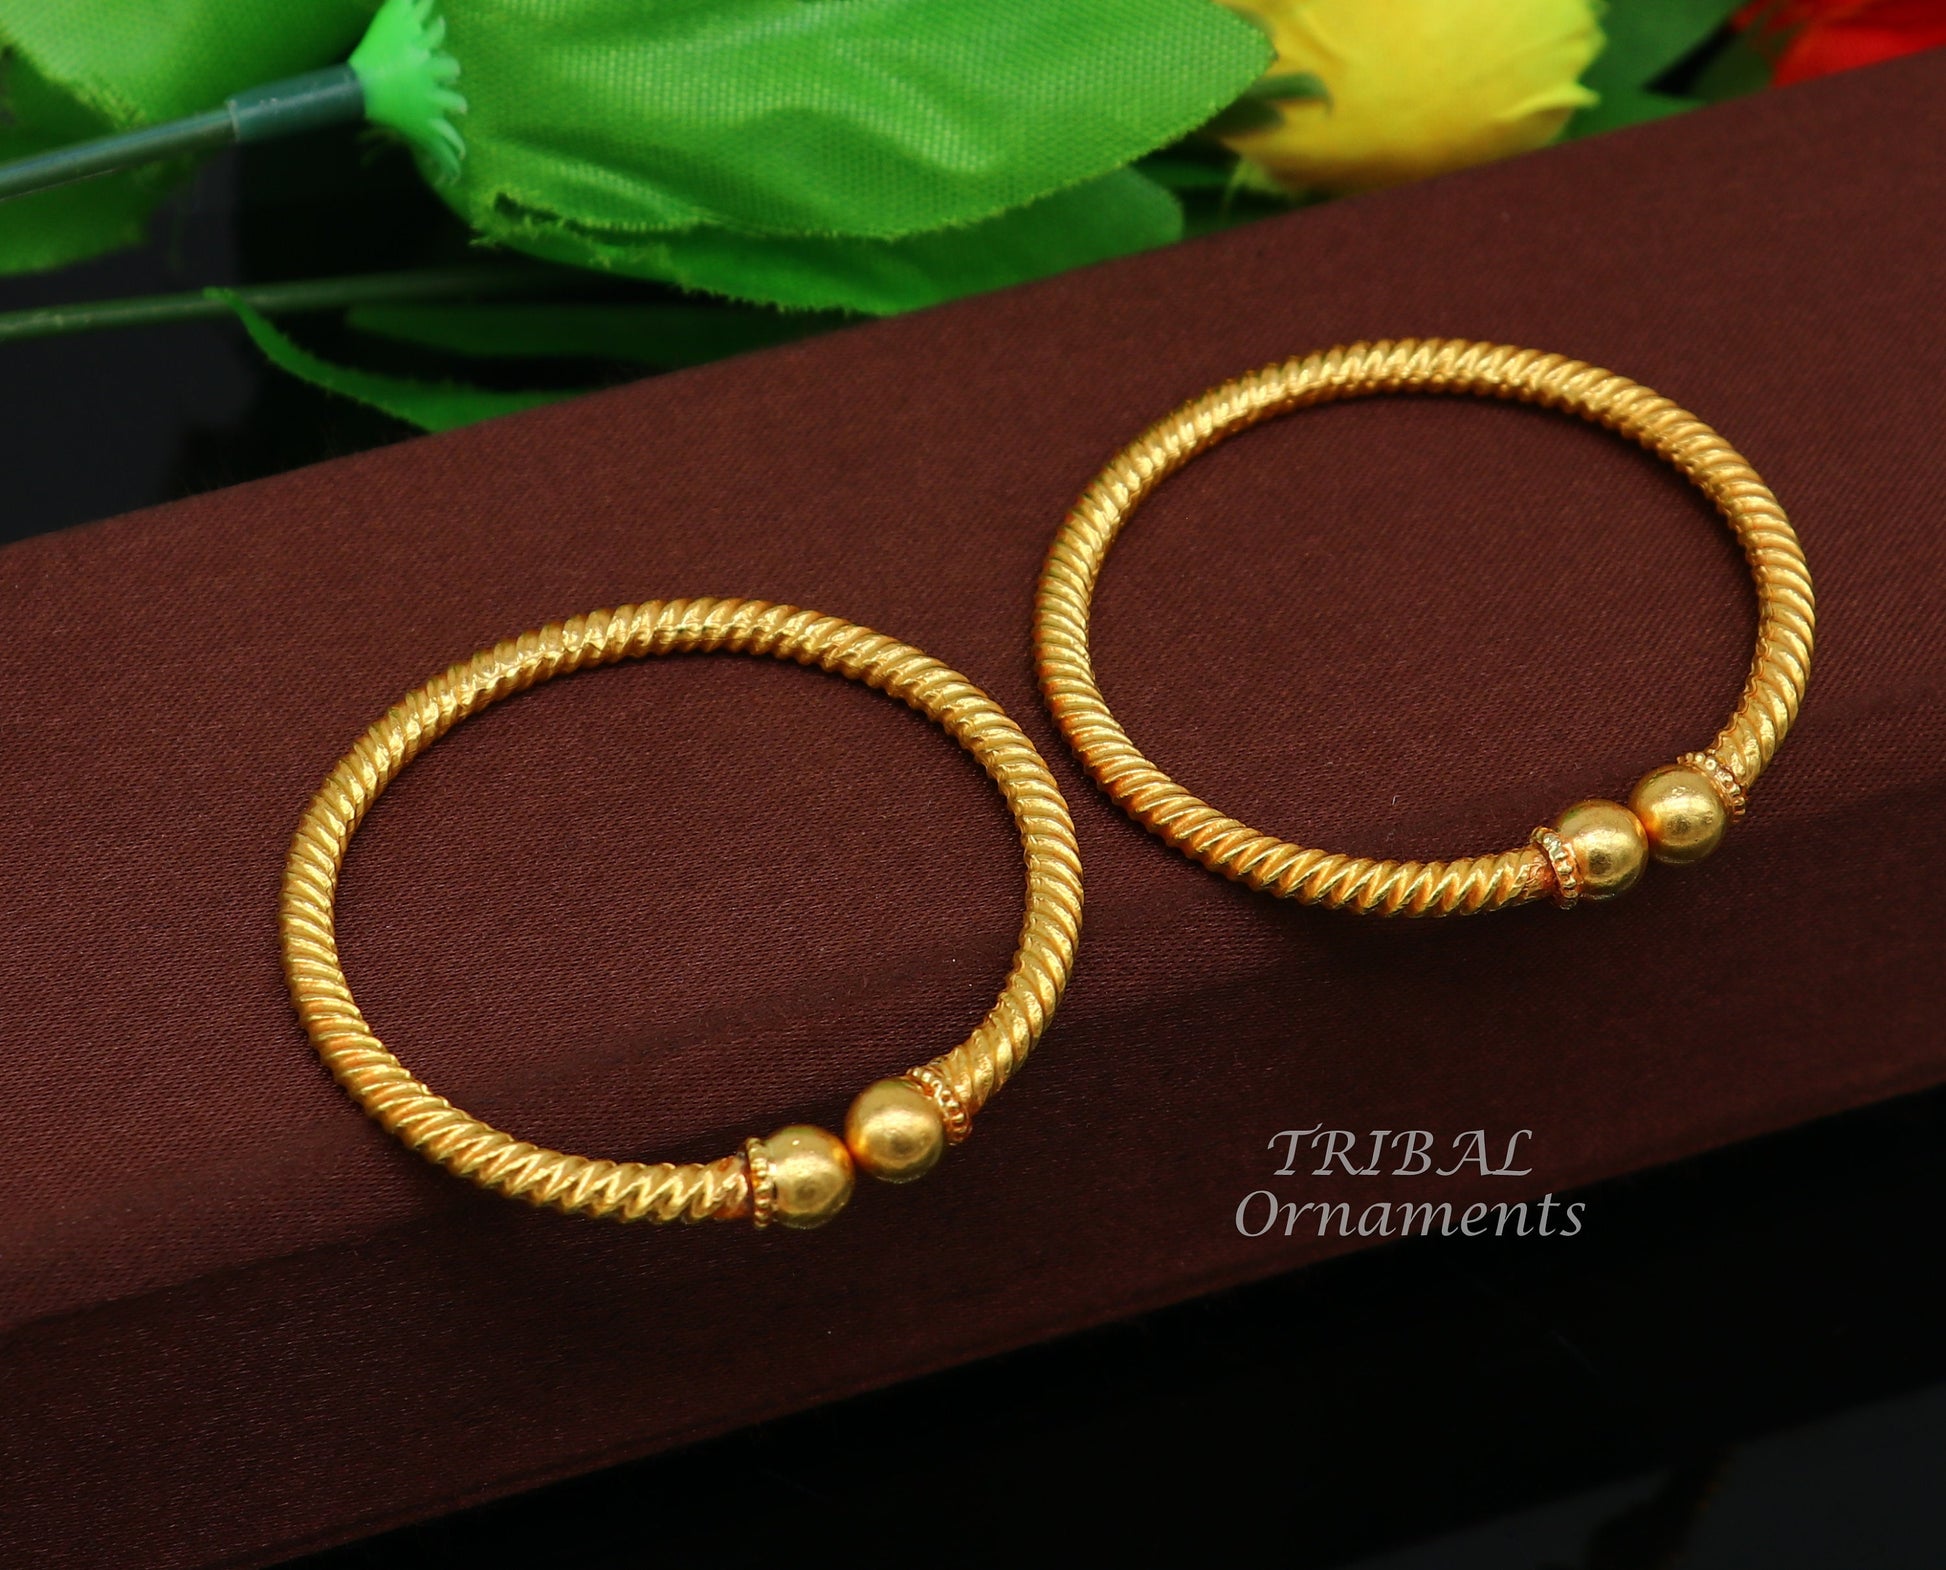 22k yellow gold handmade fabulous vintage ball face design baby bangle pair kada certified hallmarked jewelry for baby or kids  gk03 - TRIBAL ORNAMENTS